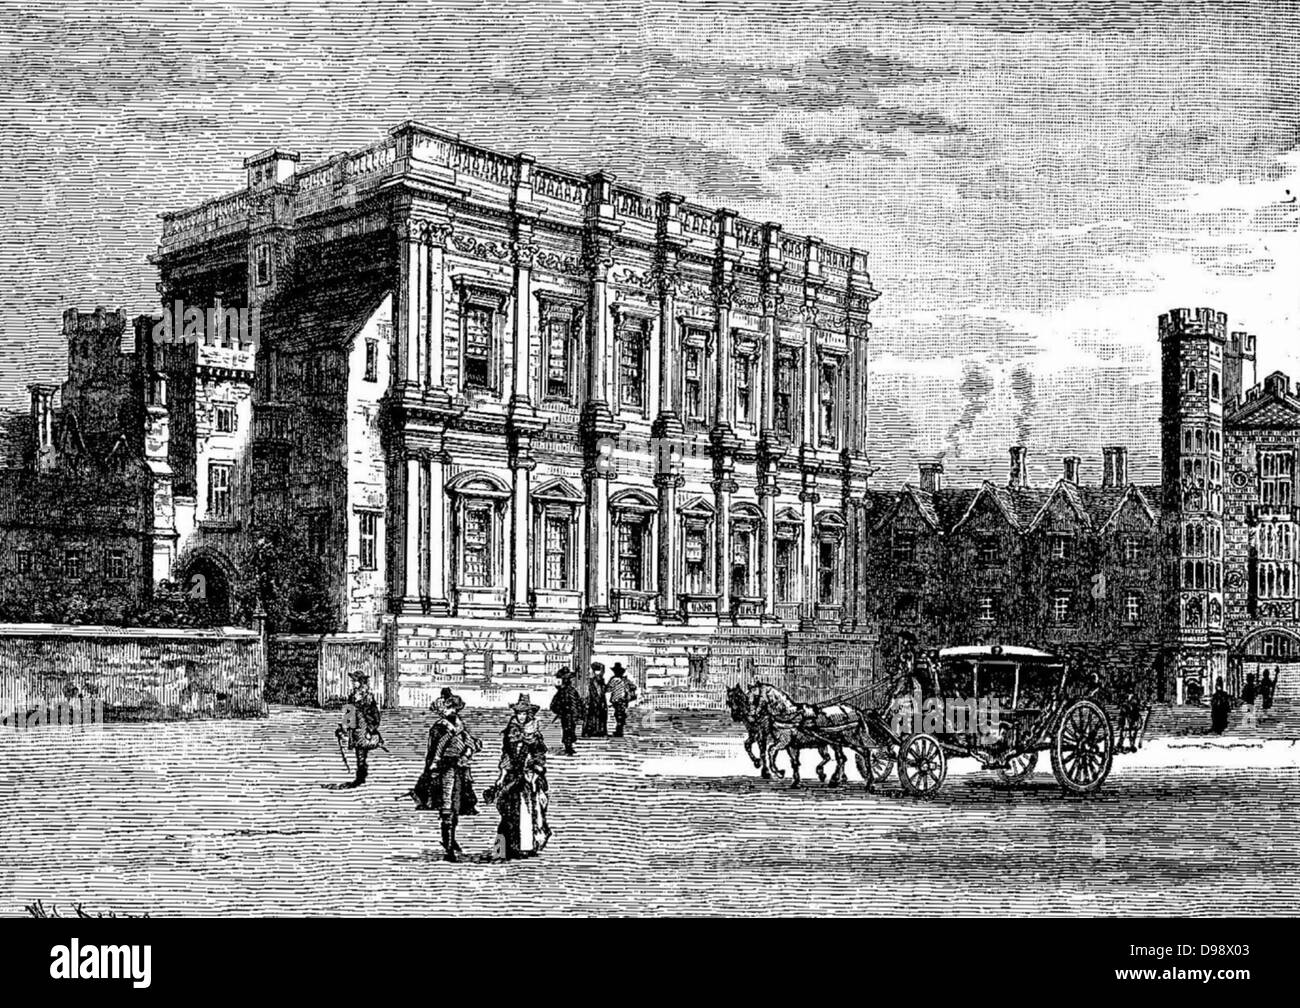 Banqueting house, London, Circa 1640-70 From an engraving Stock Photo